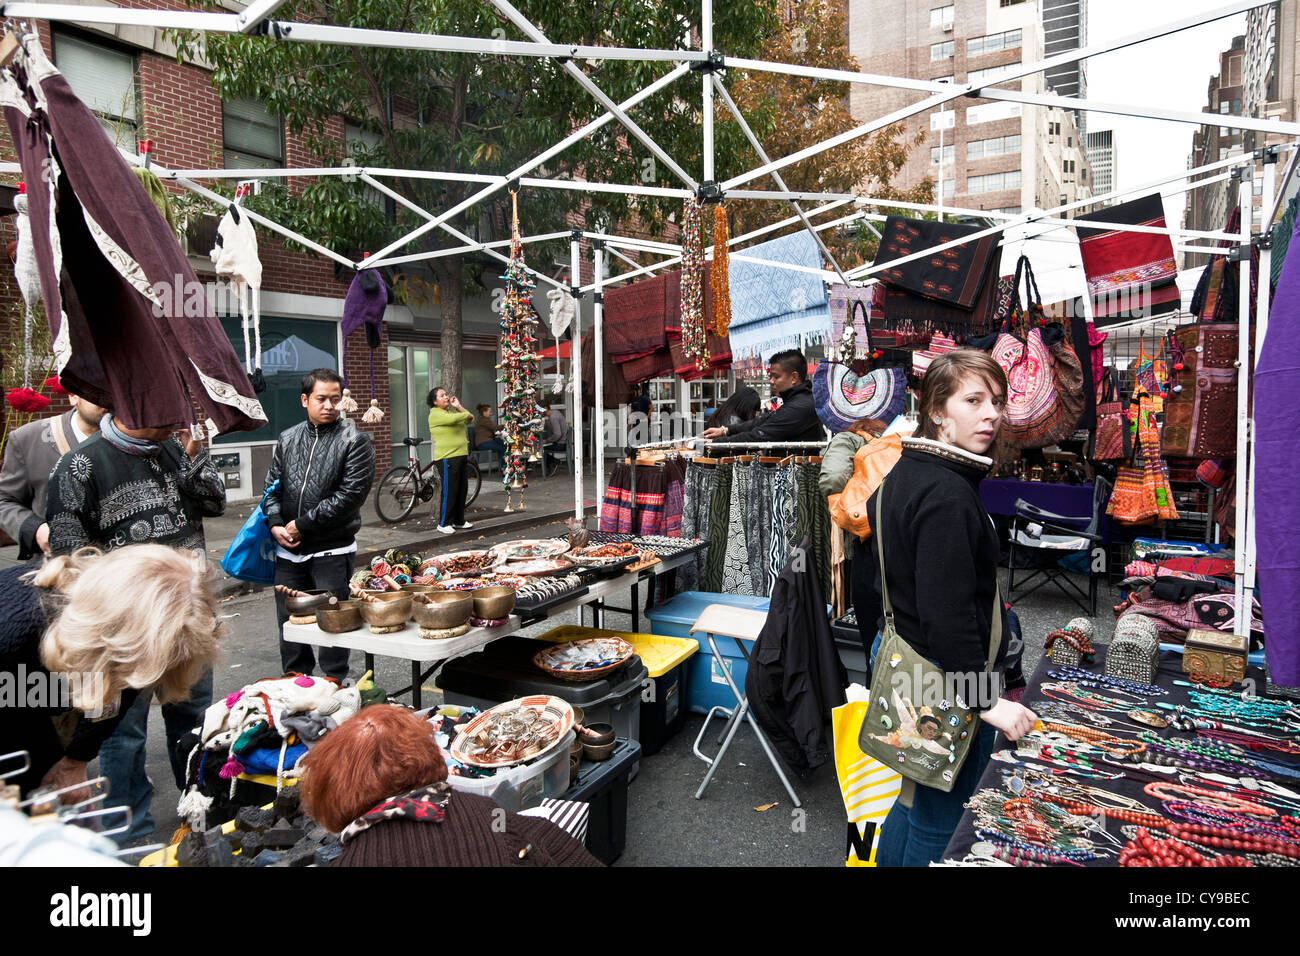 diverse people shoppers browse crowded booth featuring craft items & clothing for sale at Hells Kitchen weekend flea market Stock Photo